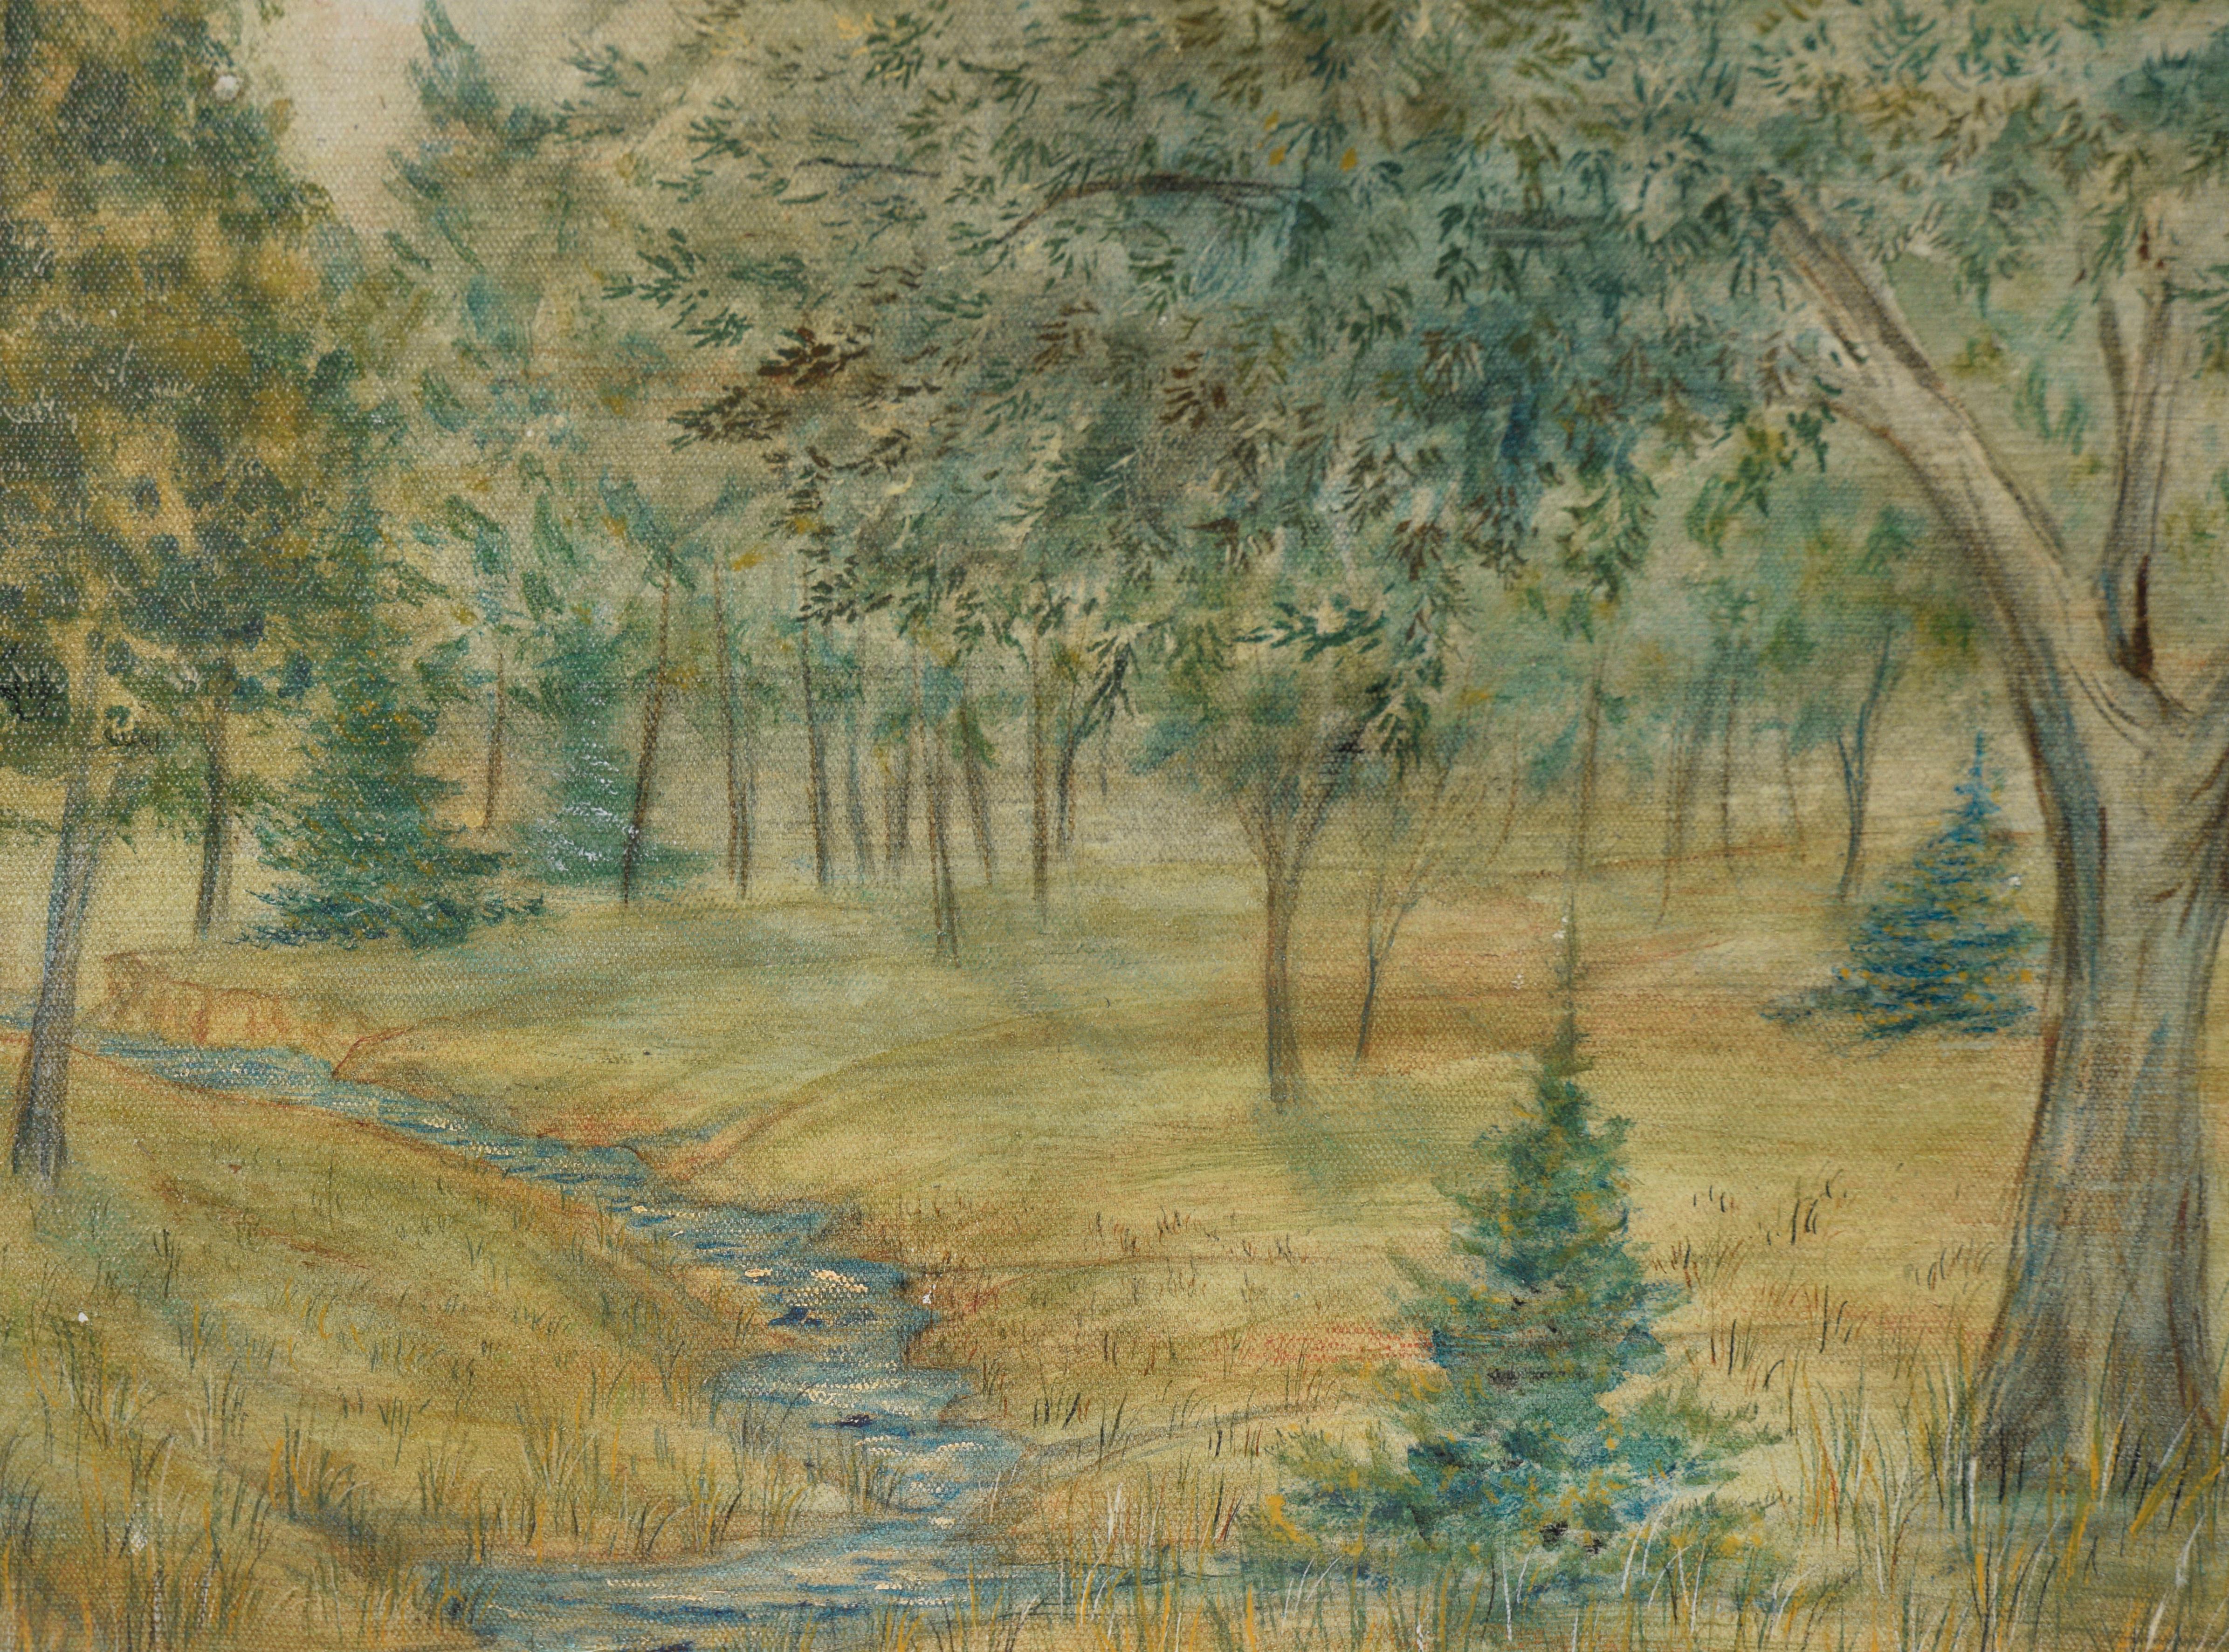 Creek Through The Trees - Oil on Canvas

Impressionist painting of a creek running through a grove of trees by Michelle Marco (American). A grove of trees surrounds a small creek that runs through the middle of the painting. Hues of yellows and